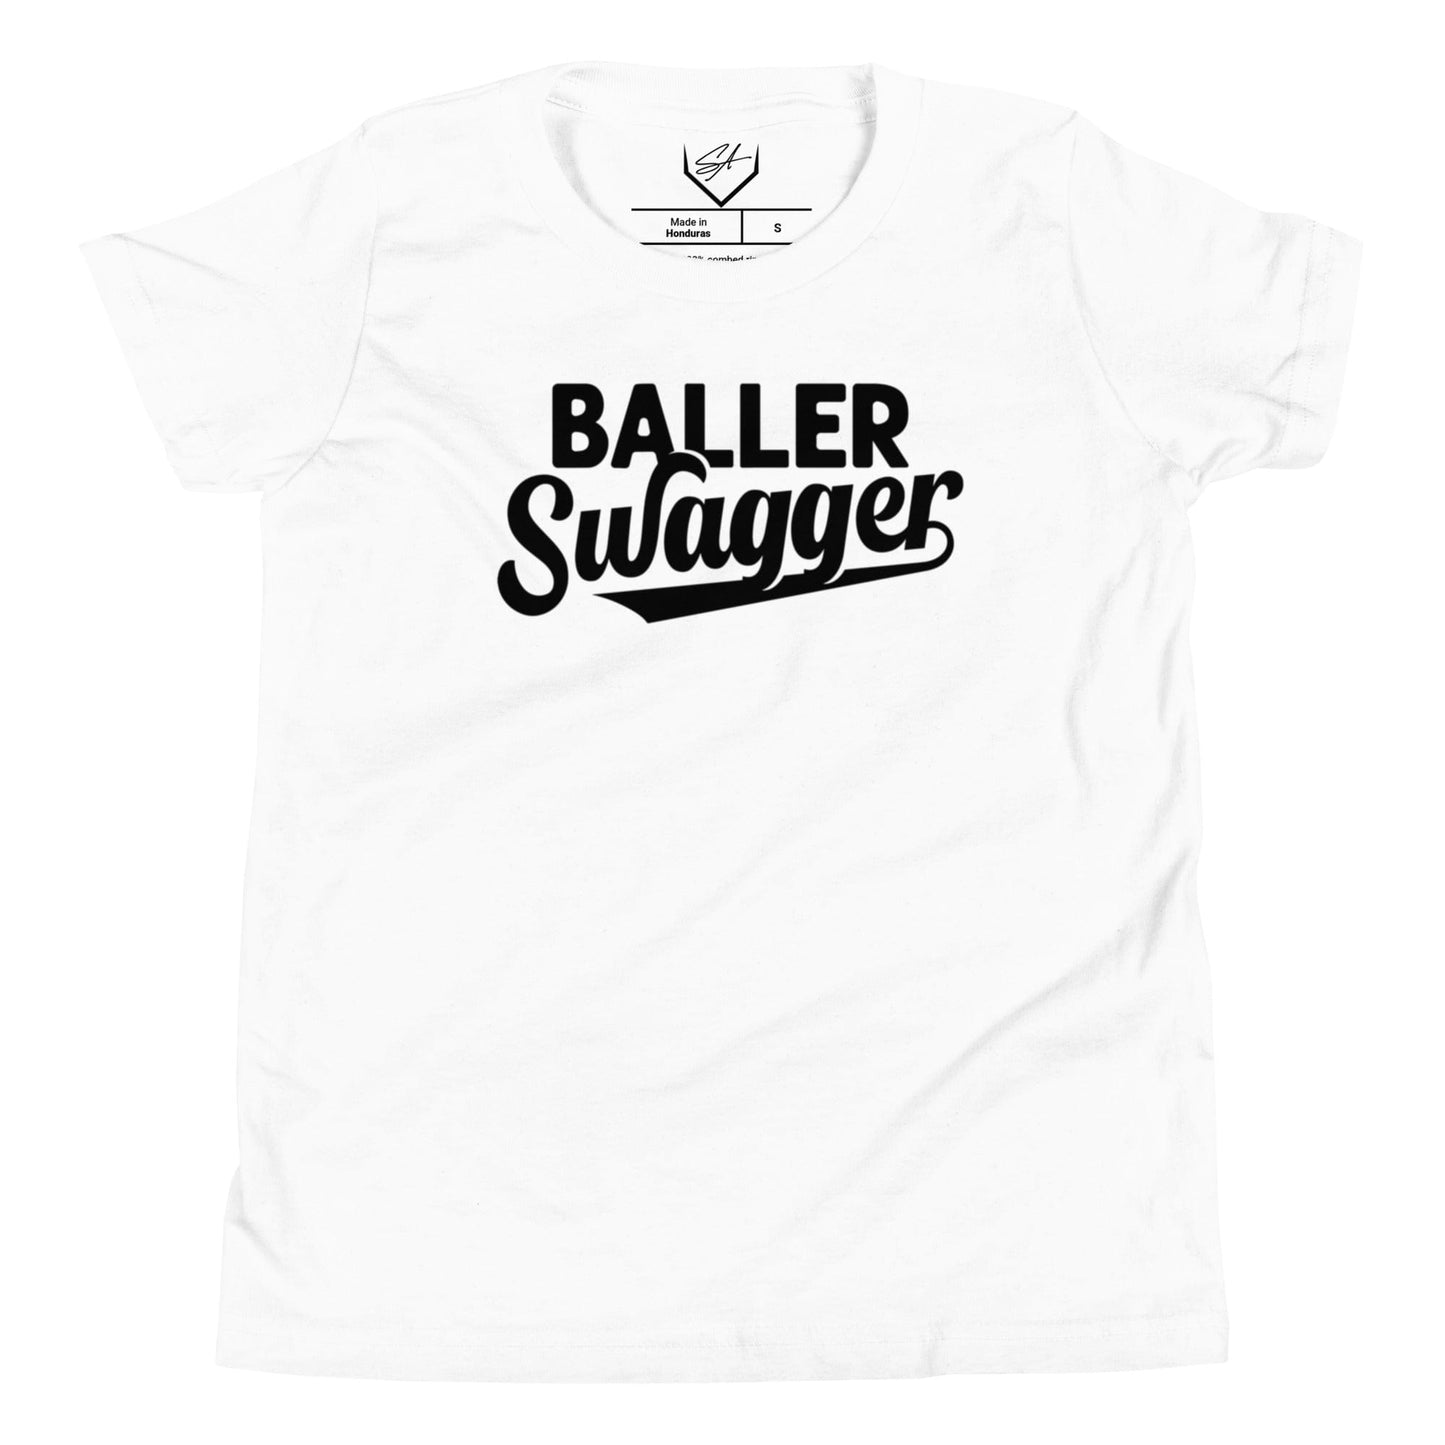 Baller Swagger - Youth Tee